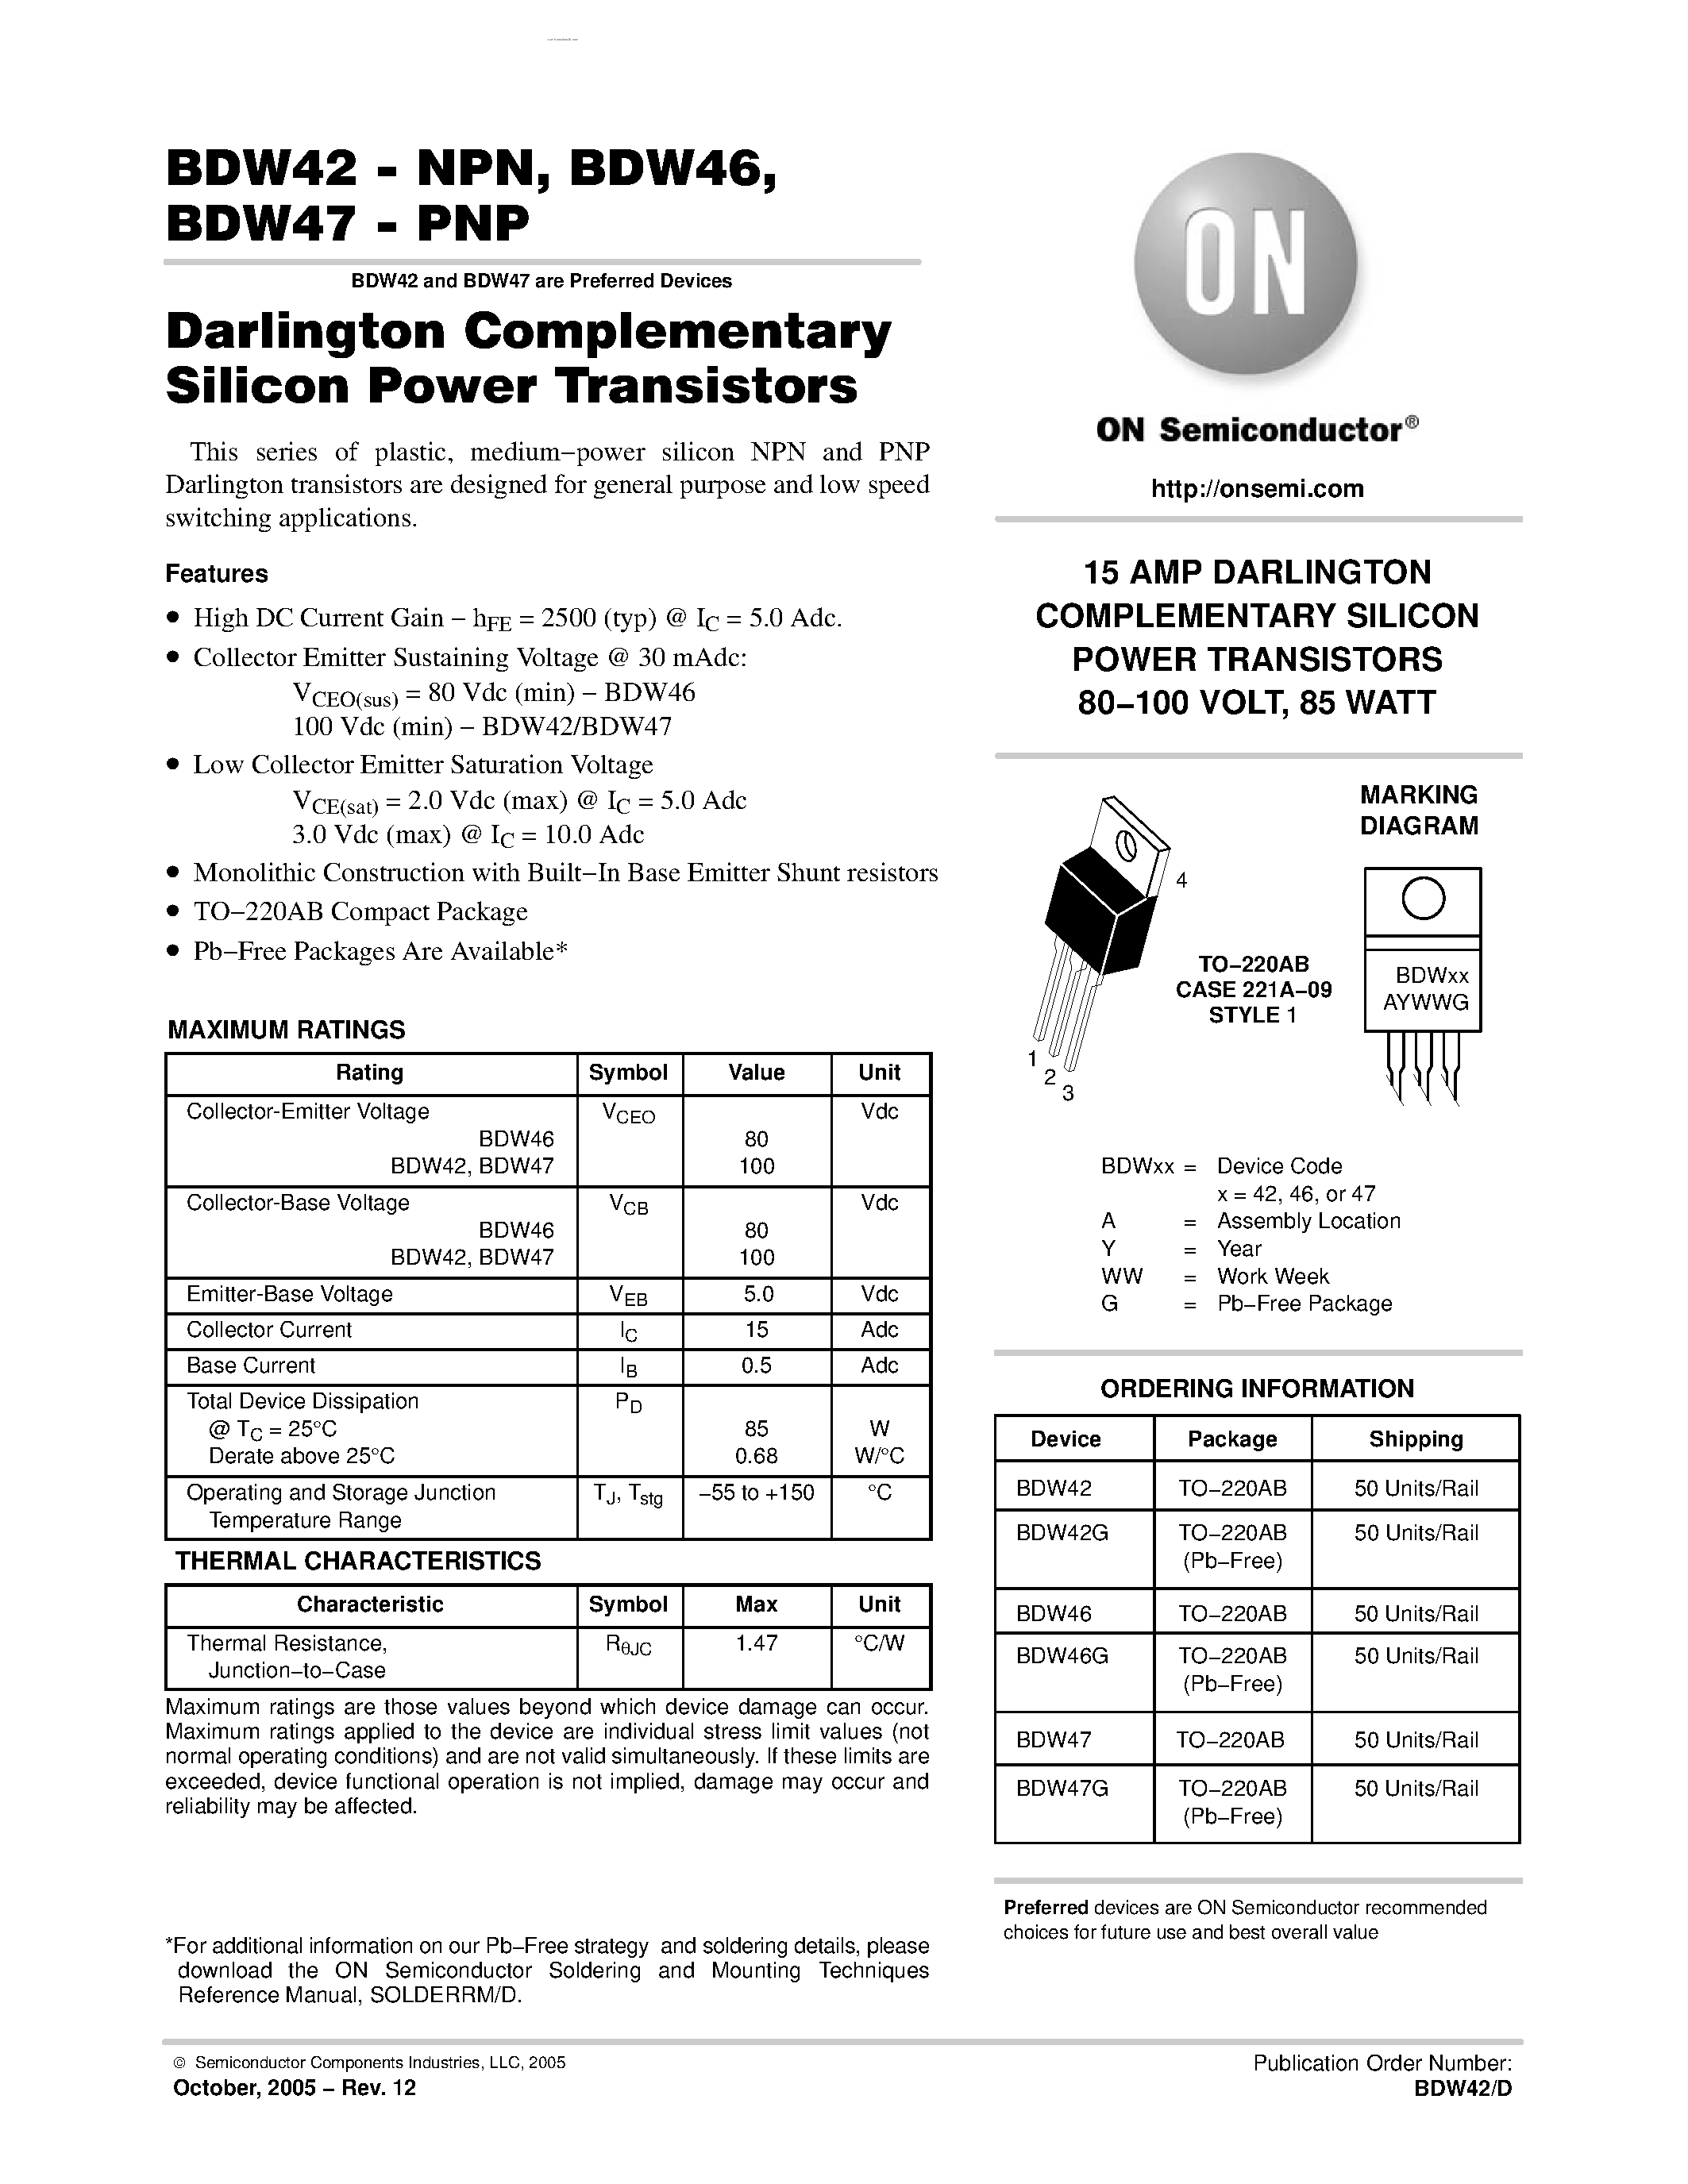 Даташит BDW42 - DARLINGTON COMPLEMENTARY SILICON POWER TRANSISTORS страница 1